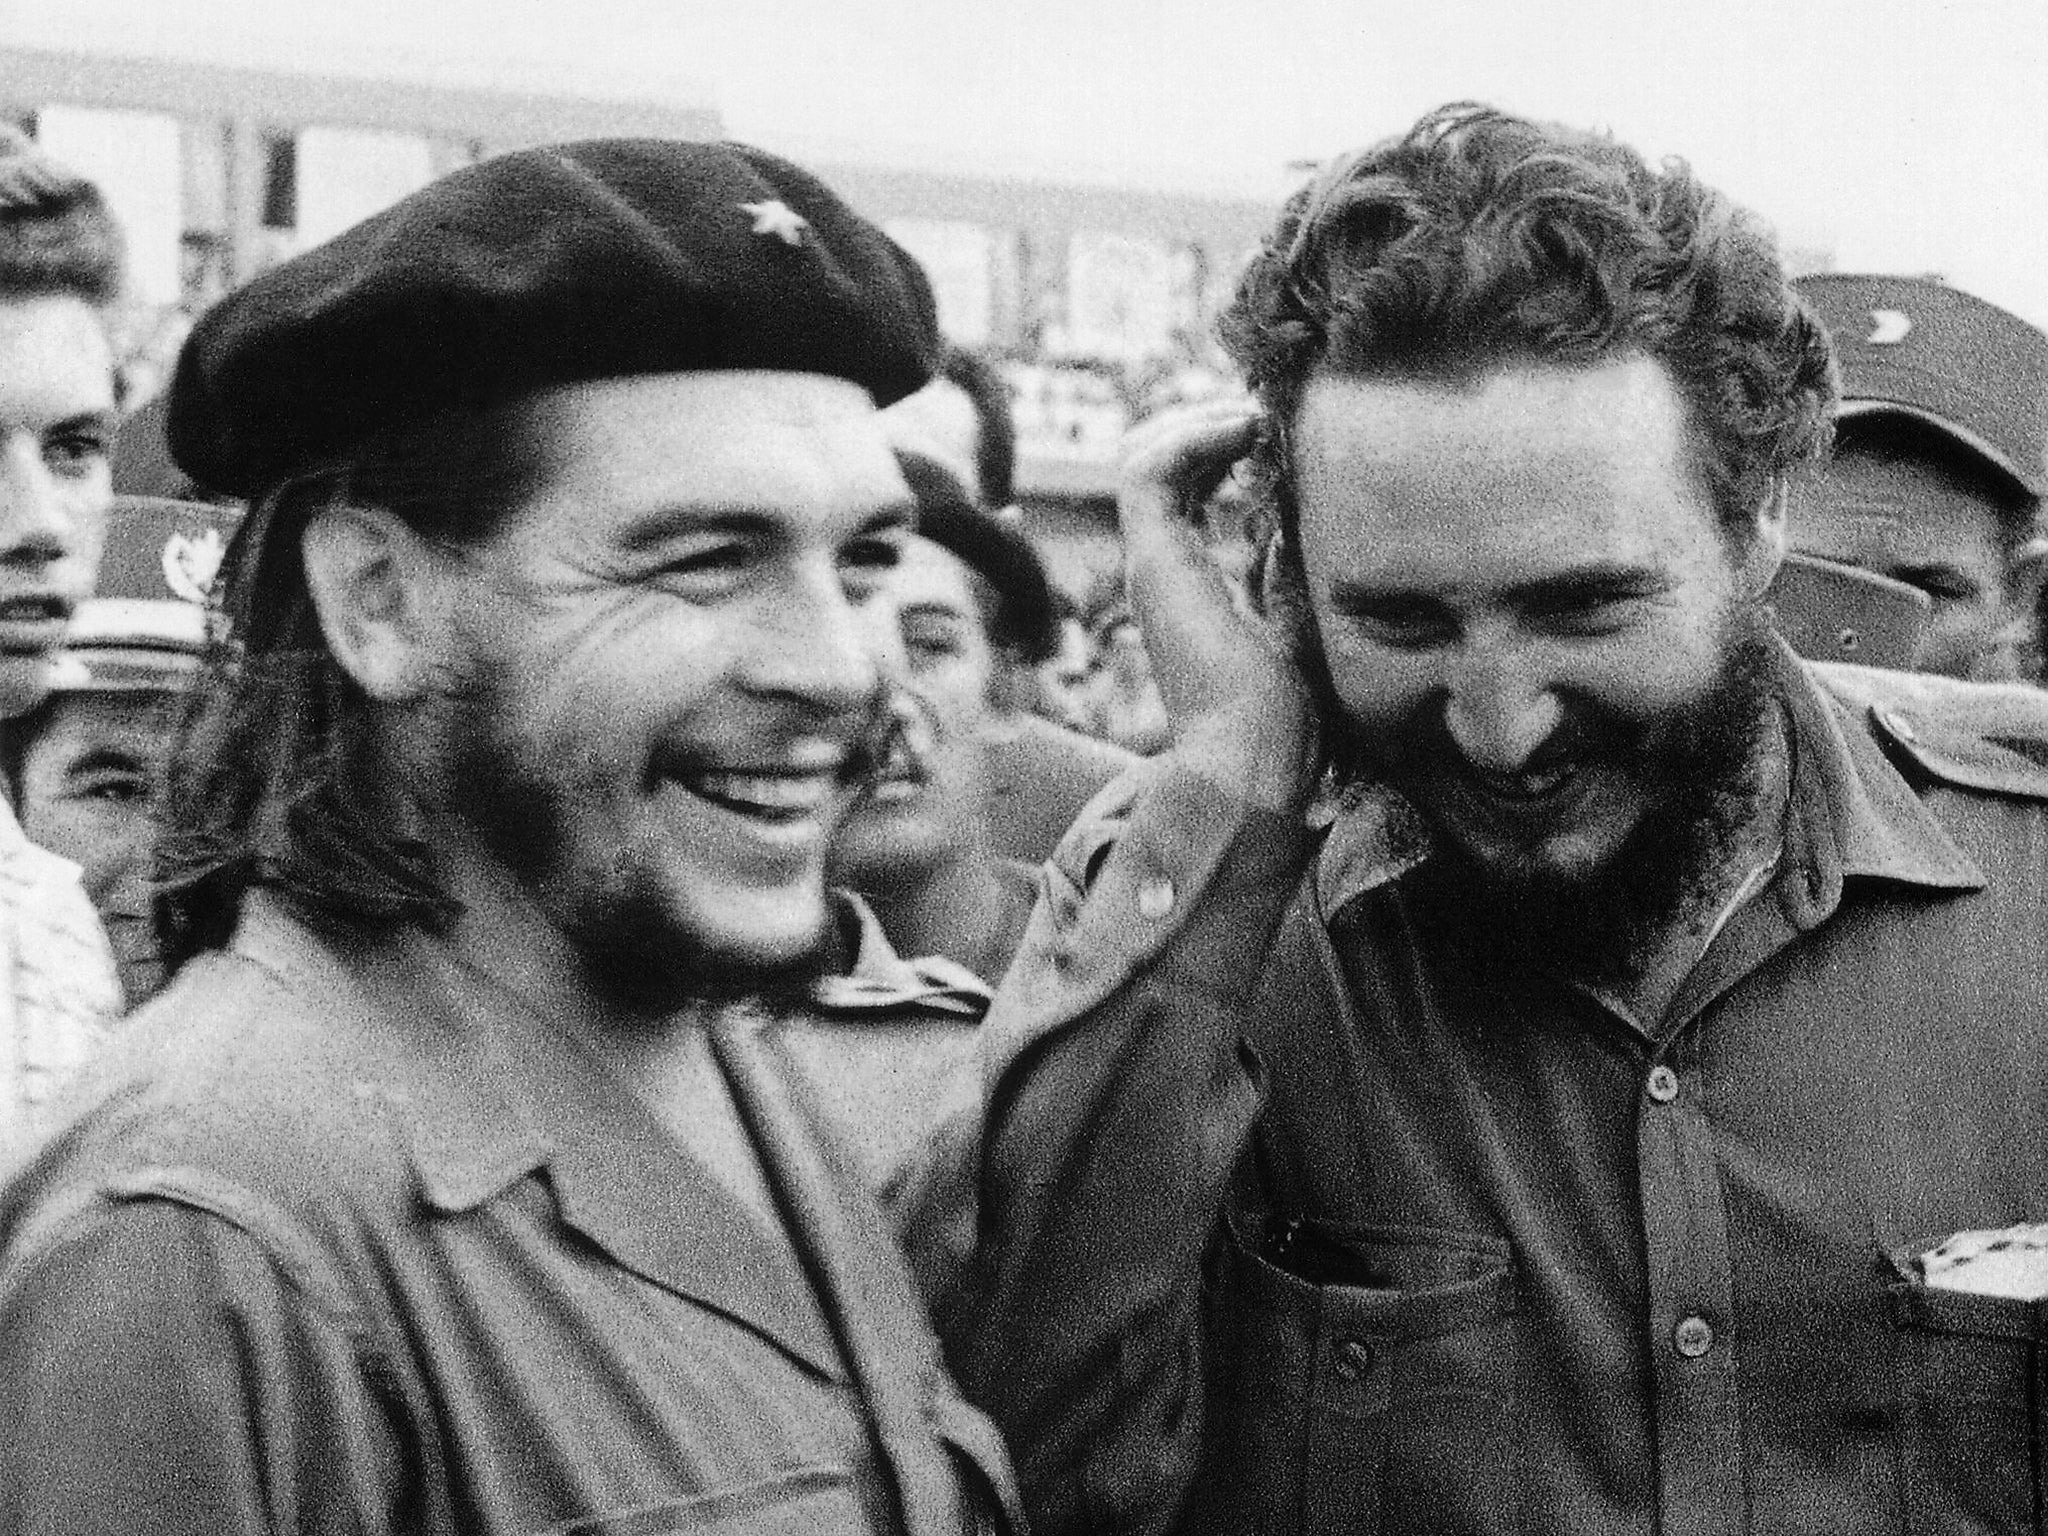 Argentine guerrilla leader Guevara, left, with Cuban Prime Minister Fidel Castro in the 1960s